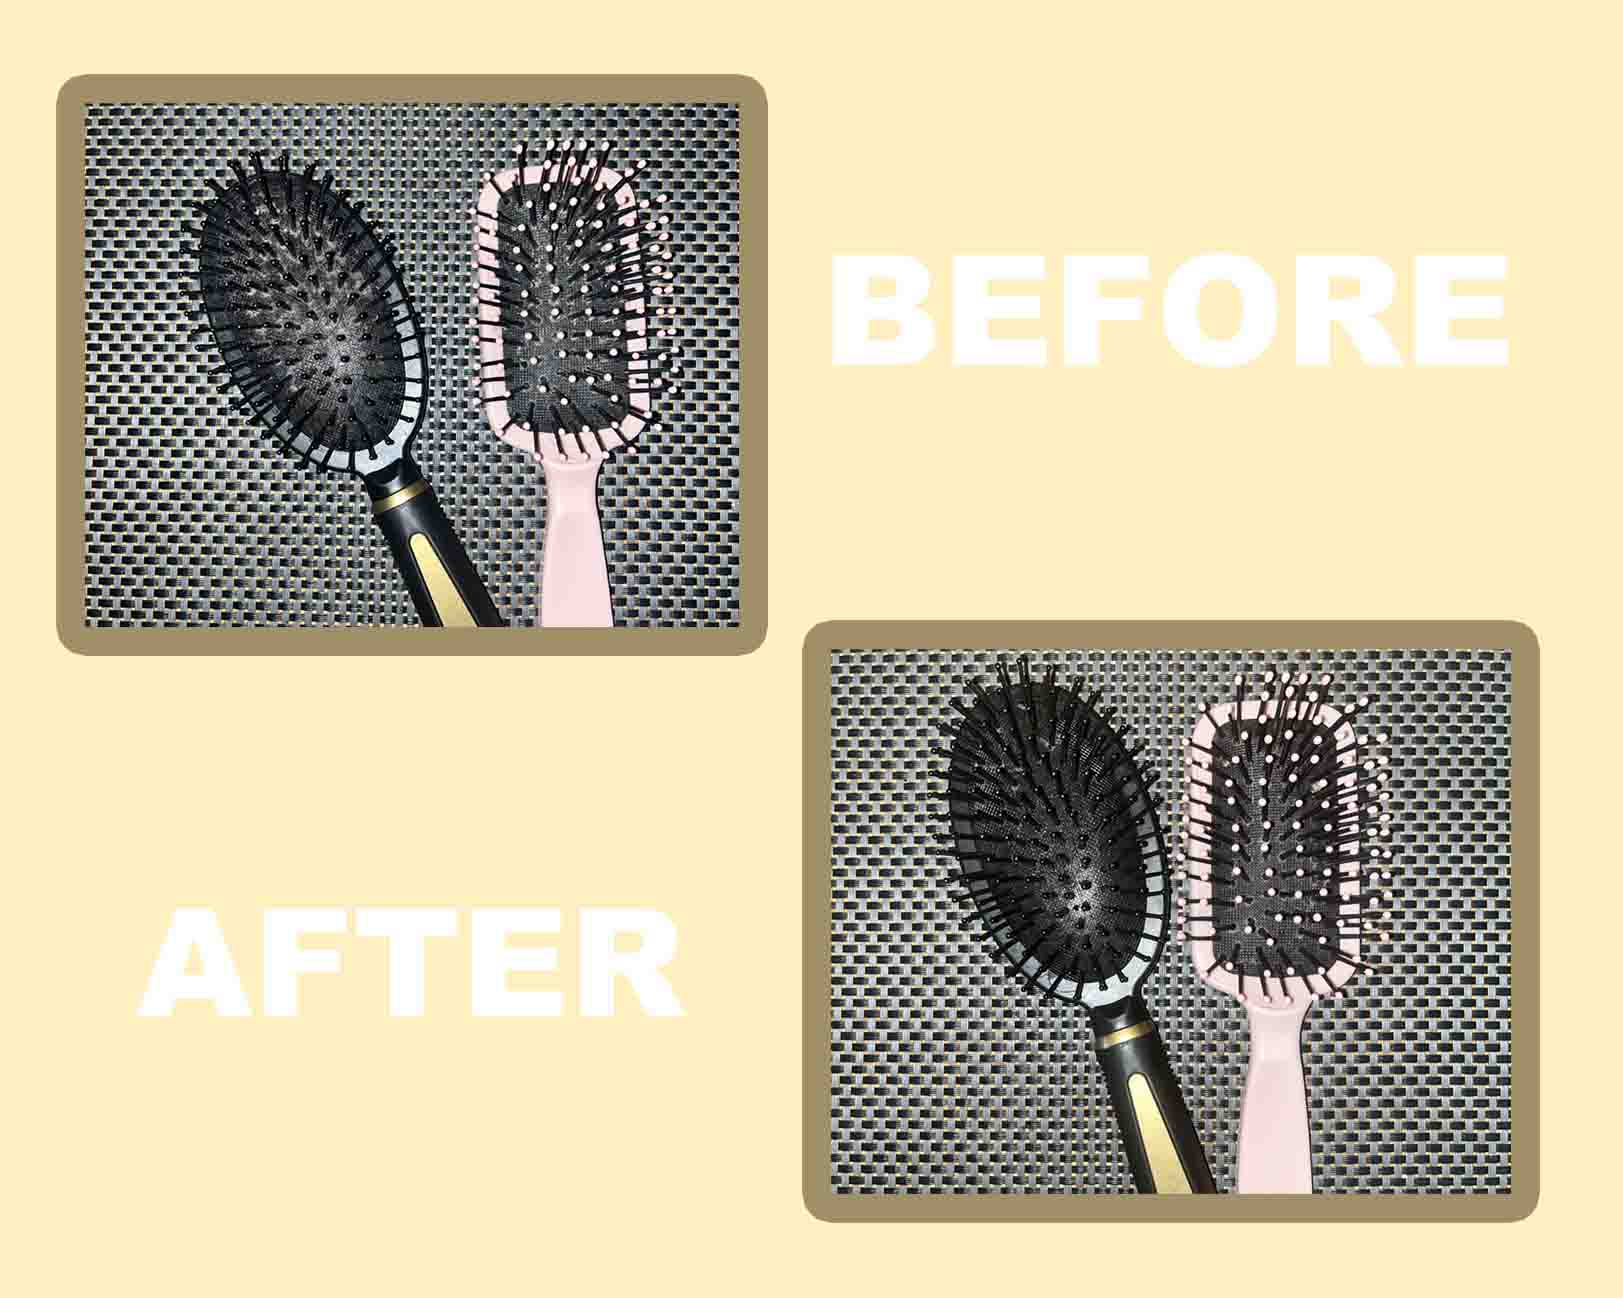 https://images.ctfassets.net/qmmajc22qsgf/4N1Eo1PRJQOtAkddH5w9mE/c409be9639cd191b95278442a0a3abca/Before_and_after_cleaning_hair_brushes.jpg